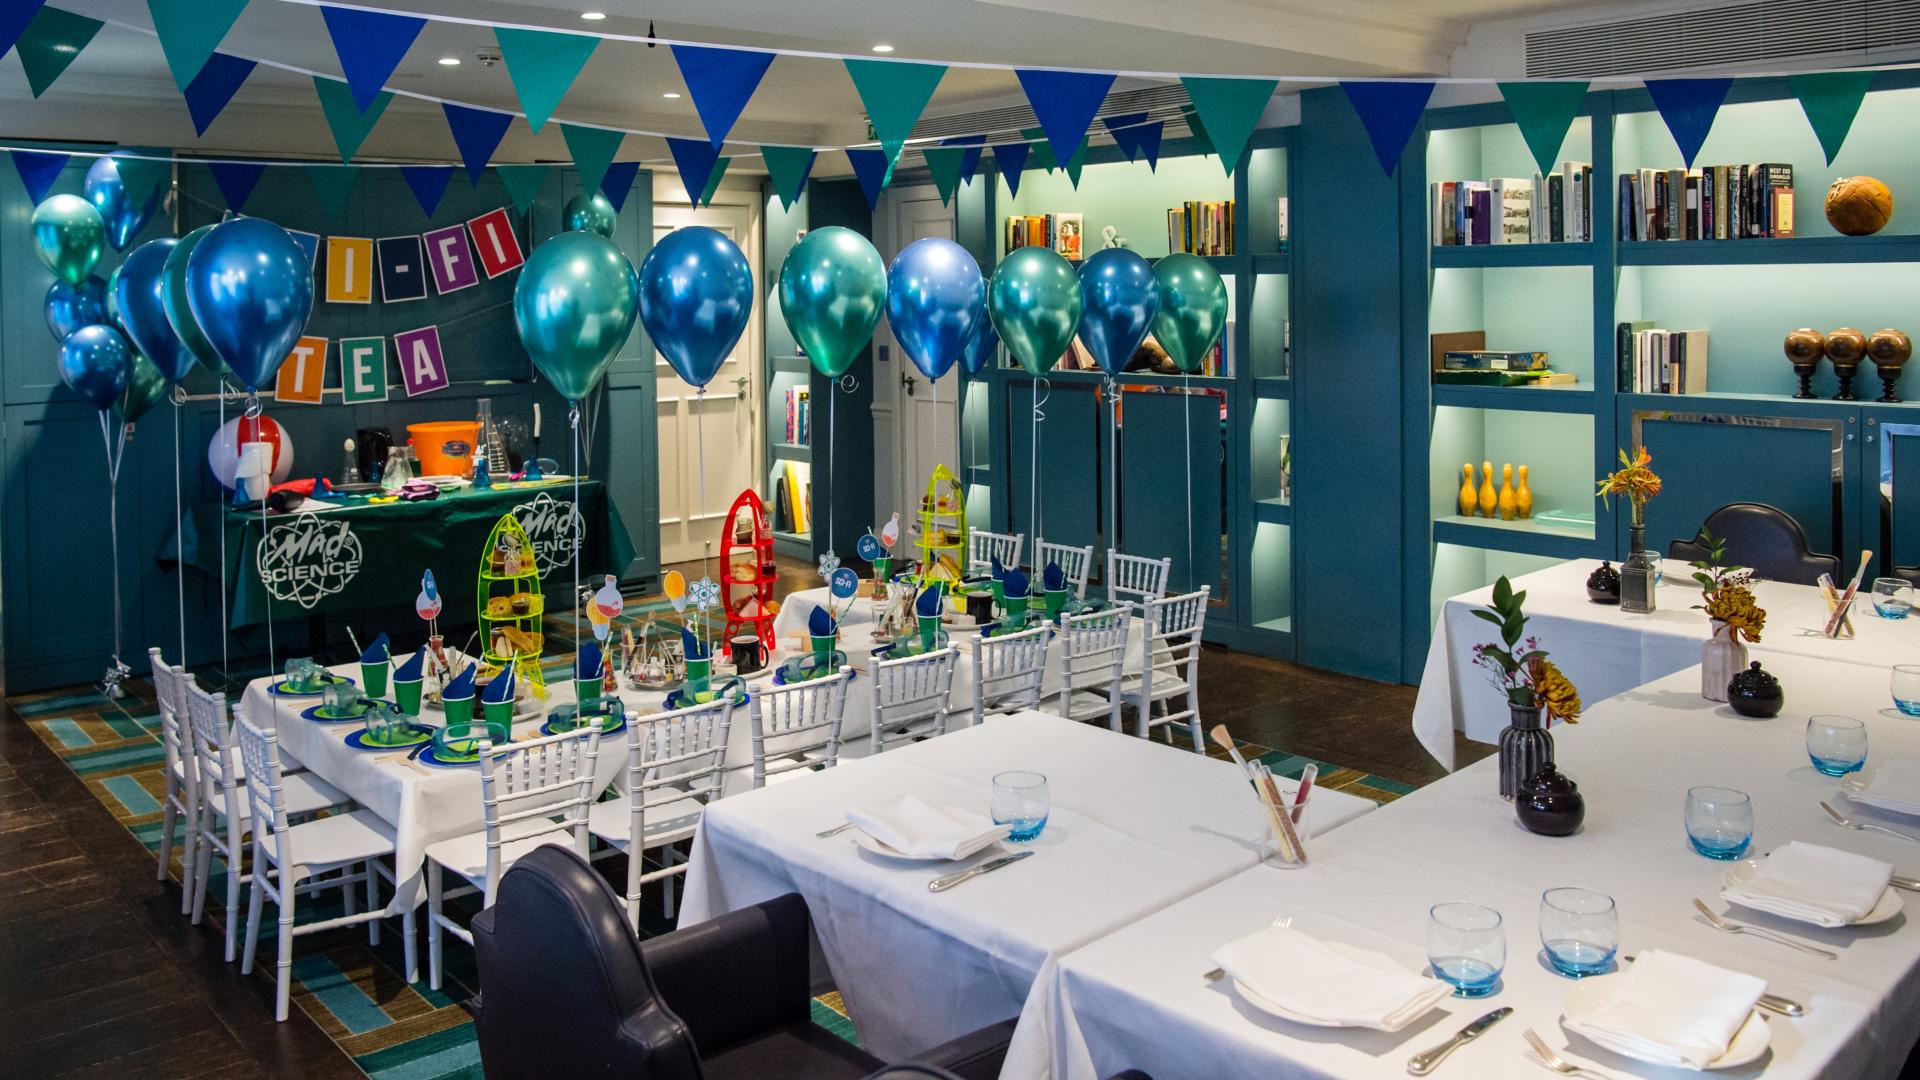 Find your Kids Birthday Party Venue in London